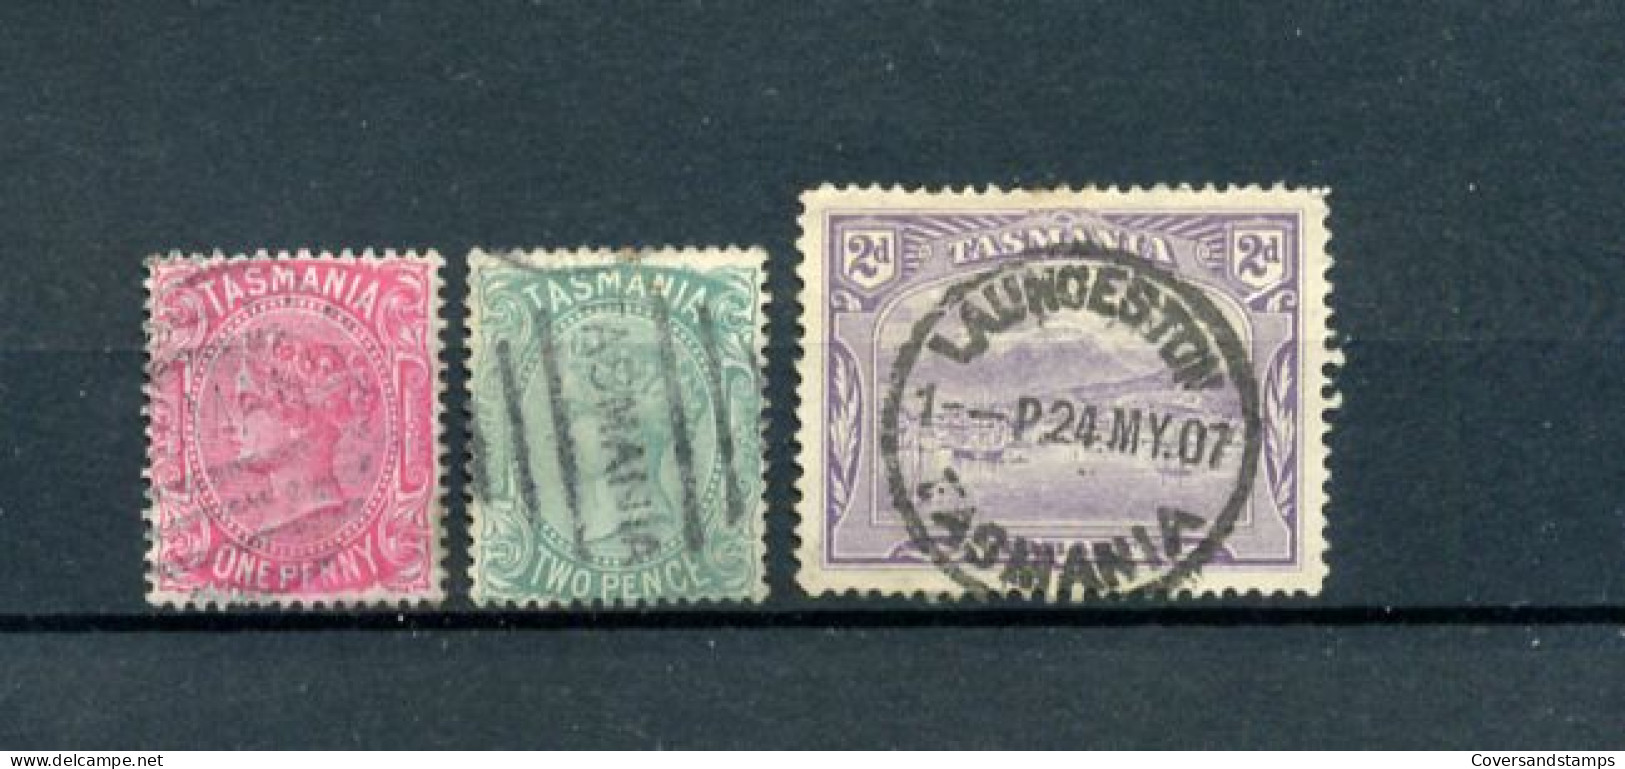 Tasmania - Lotje     Gestempeld / Cancelled                            - Used Stamps